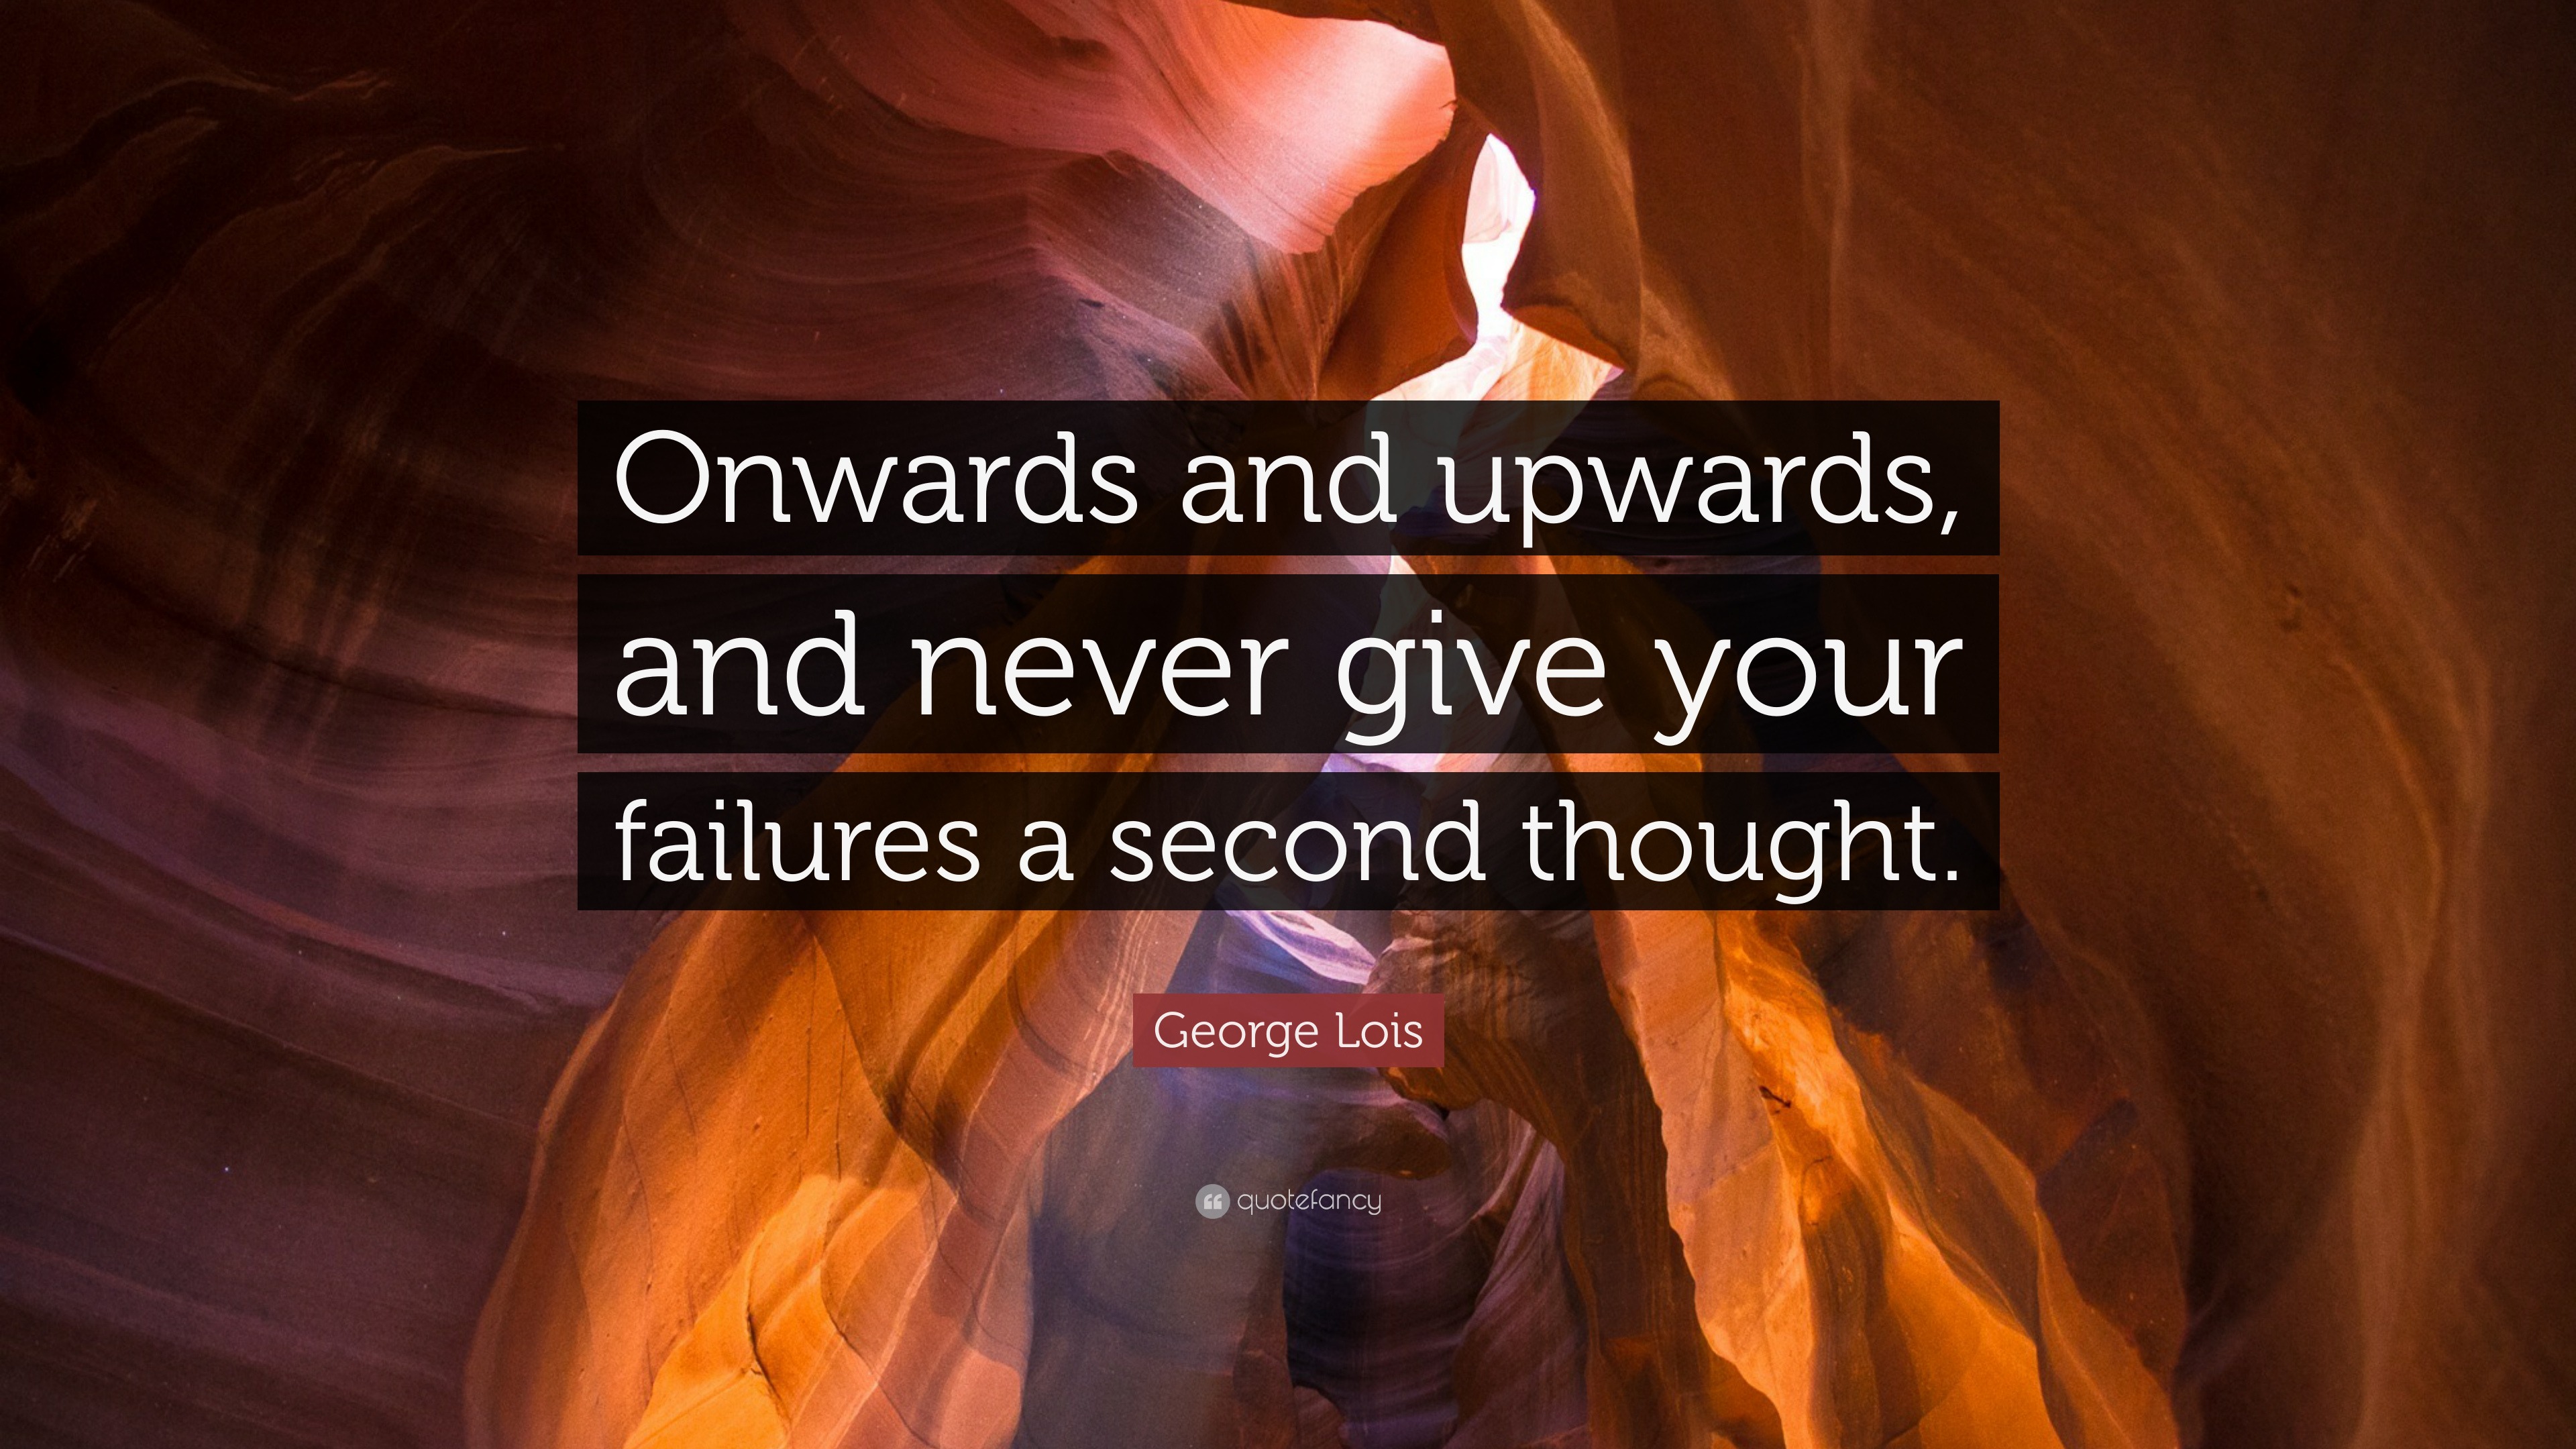 George Lois Quote: “Onwards and upwards, and never give your failures a ...